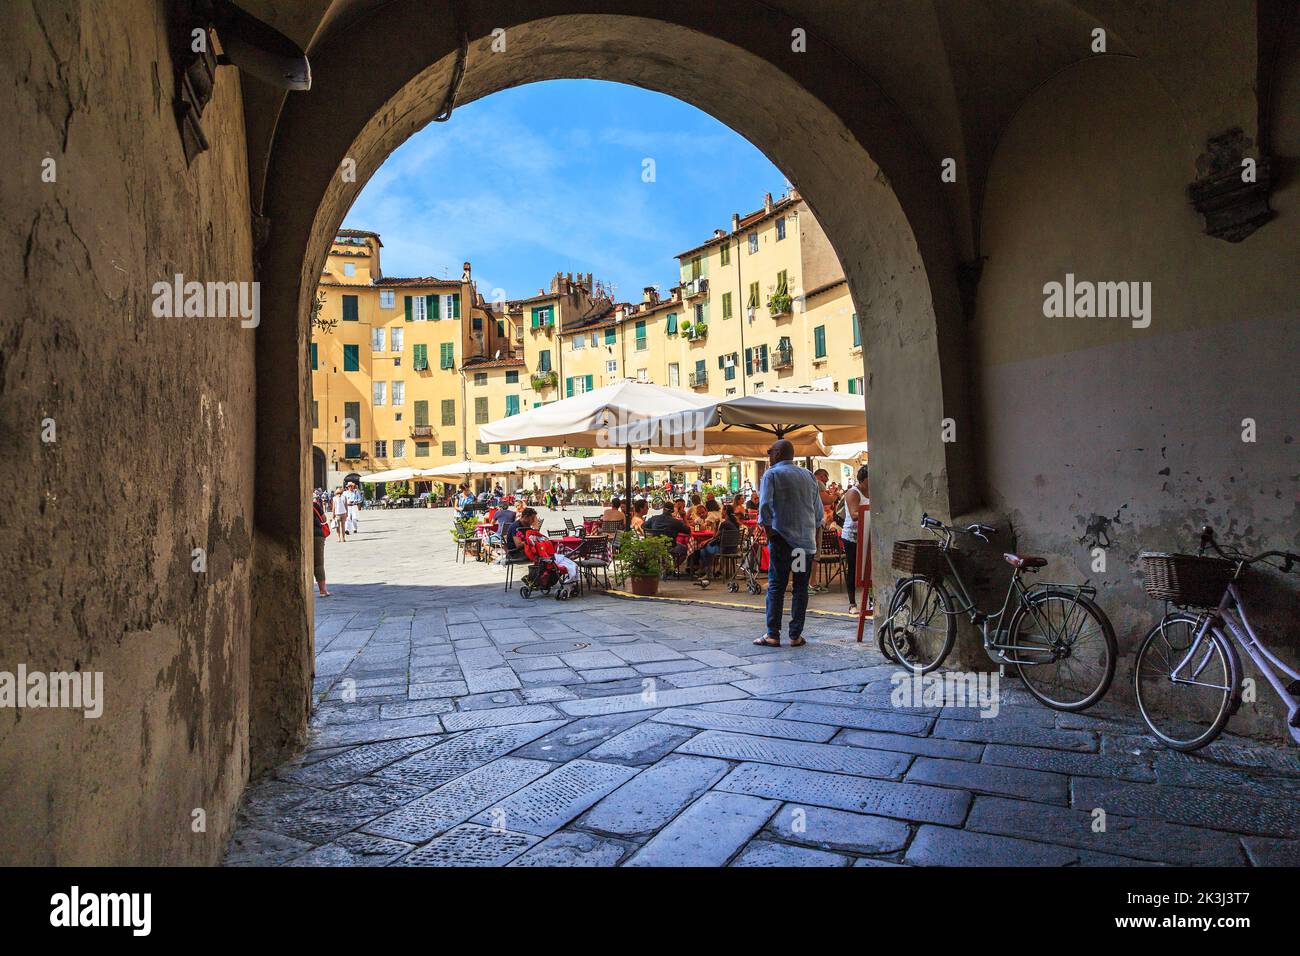 LUCCA, ITALY - SEPTEMBER 16, 2018: This is one of the arched passages to the Amphitheater Square. Stock Photo